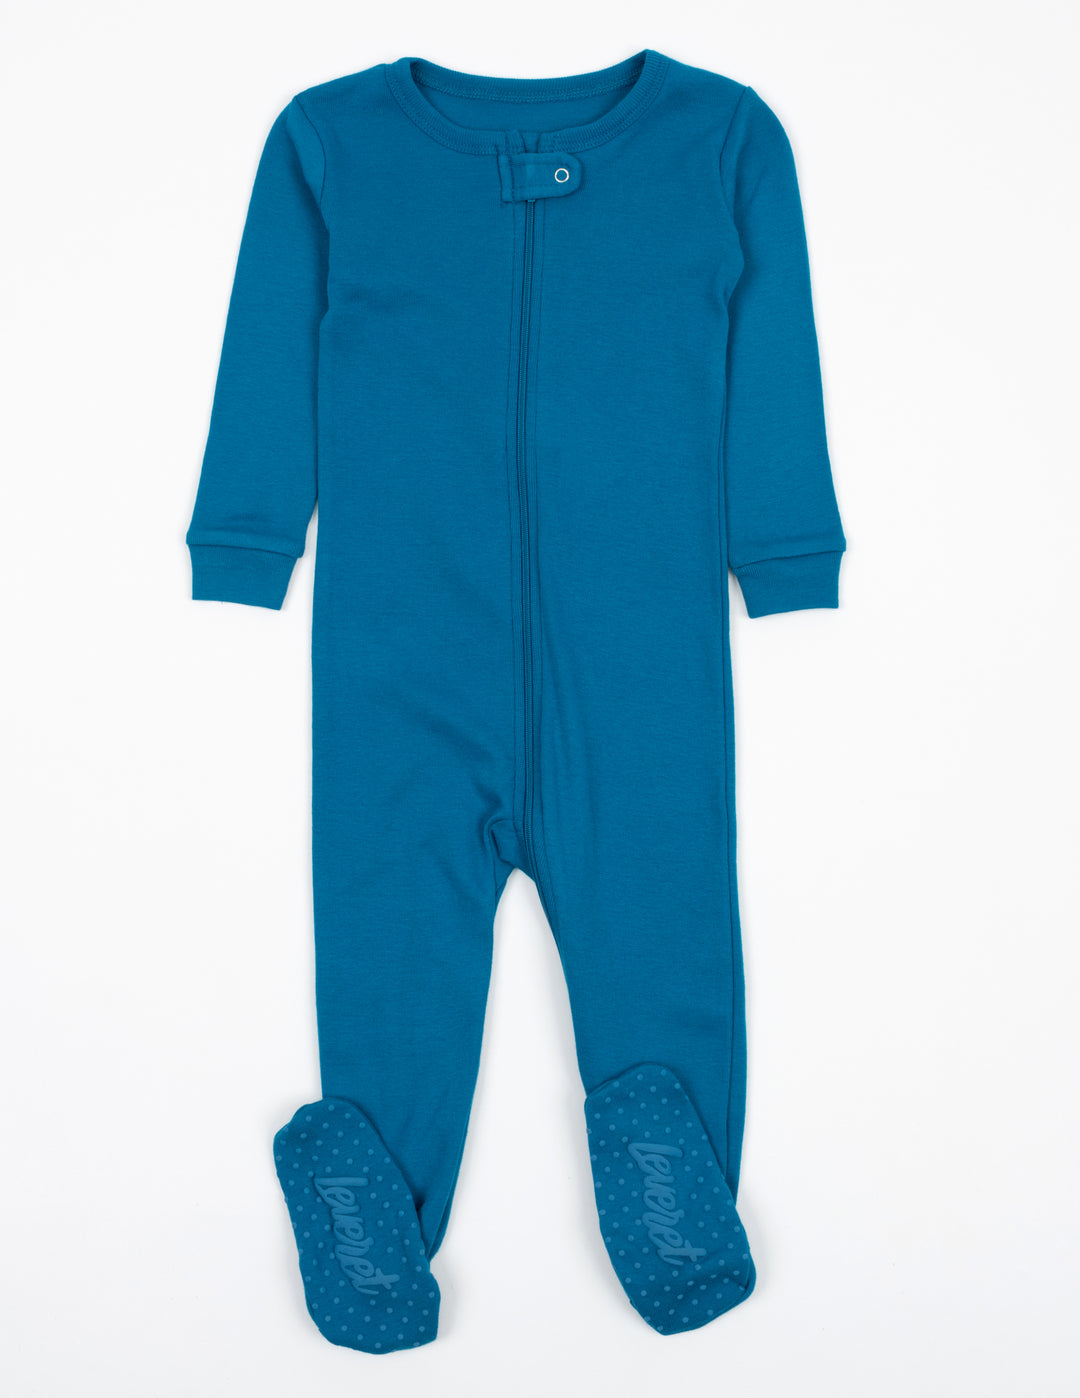 solid color teal blue baby footed pajamas